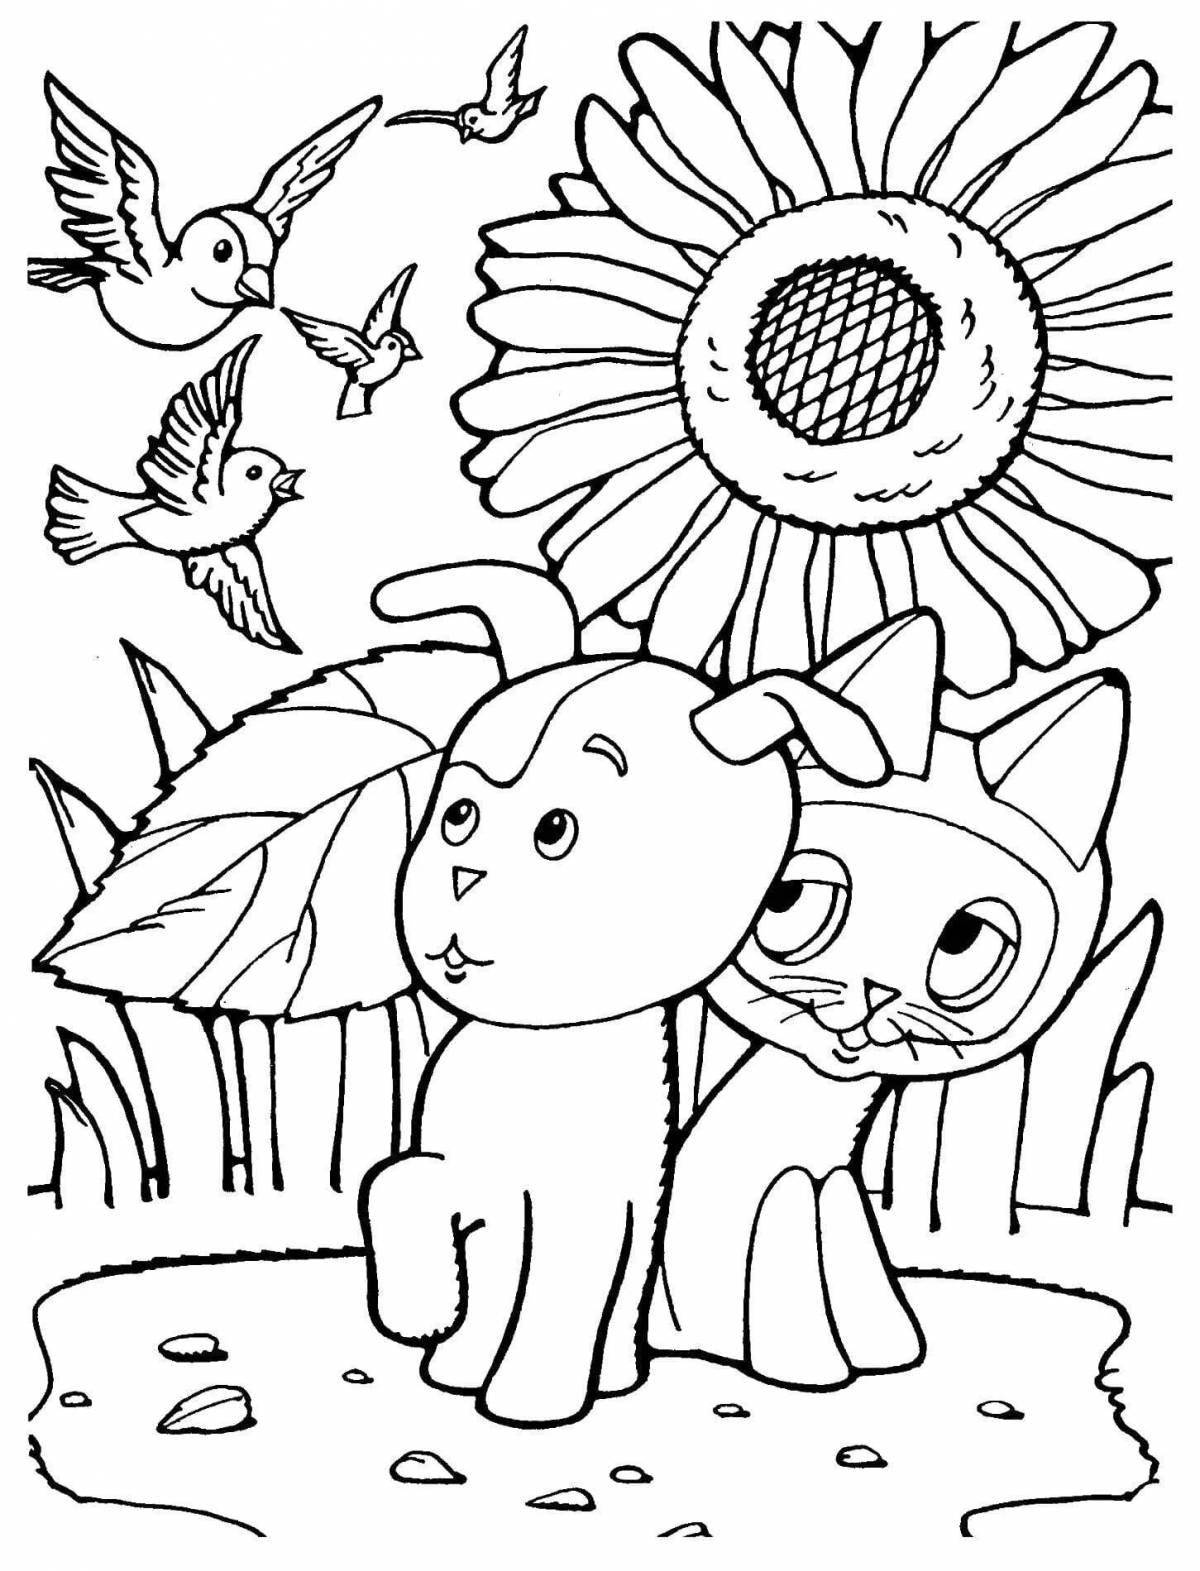 Playful woof coloring page